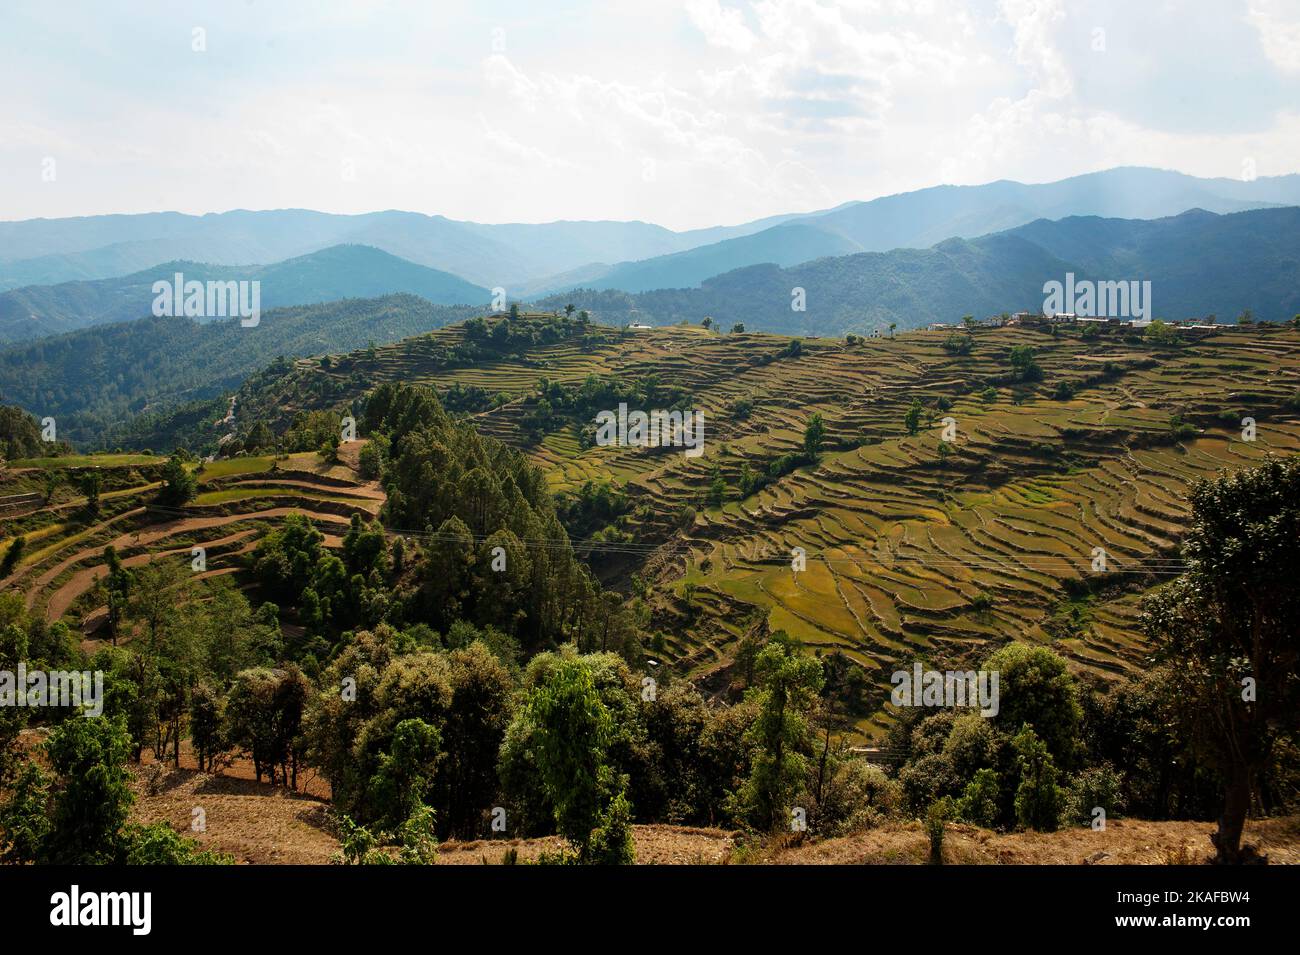 Typical terraced fields used in villages on the Kumaon hills, Uttarakhand, northern India Stock Photo